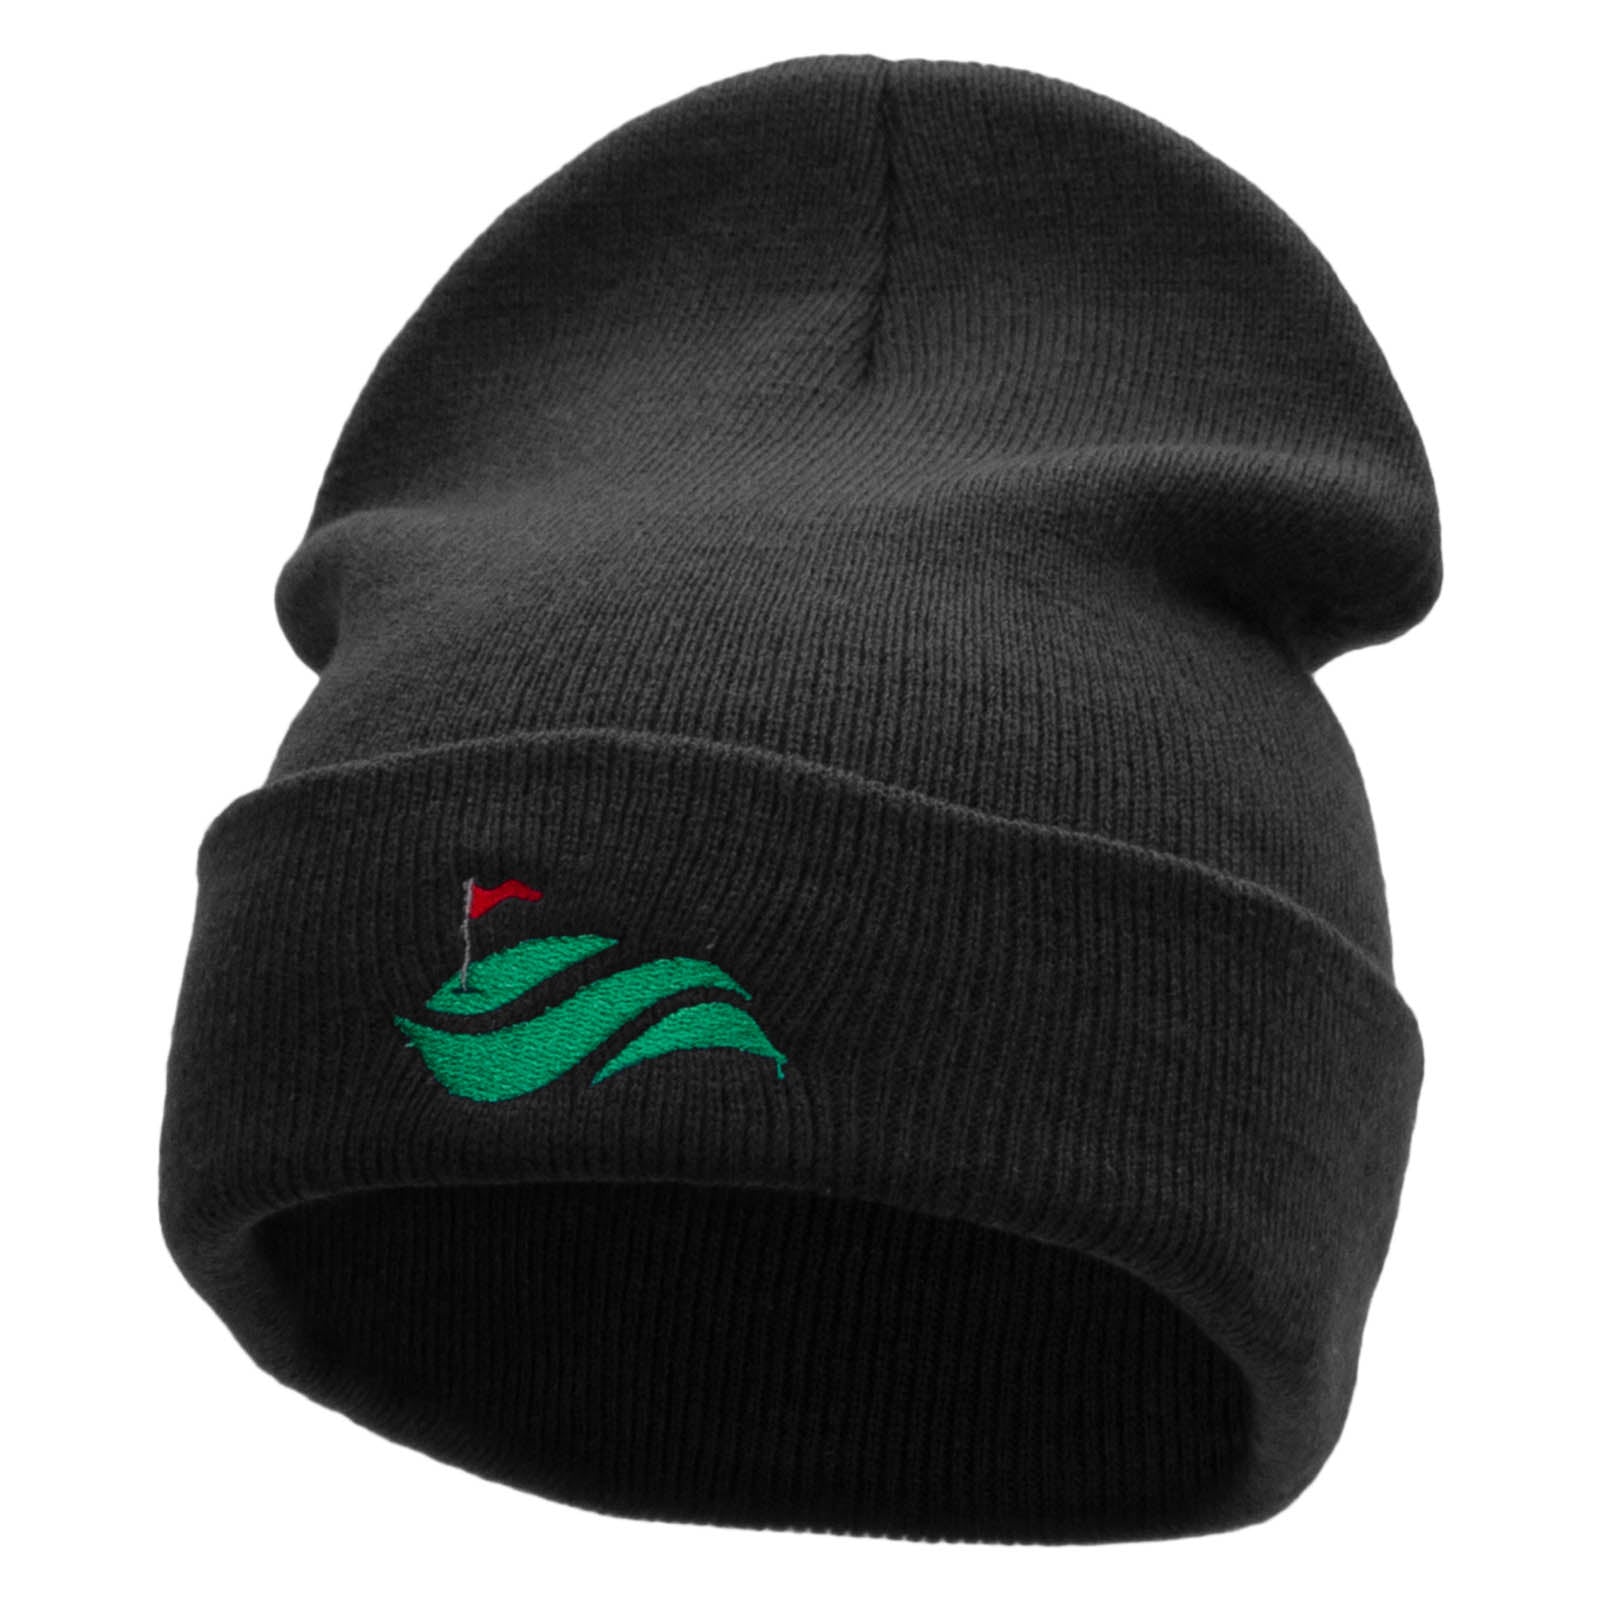 Golf Cup and Greens Embroidered 12 inch Acrylic Cuffed Long Beanie - Black OSFM